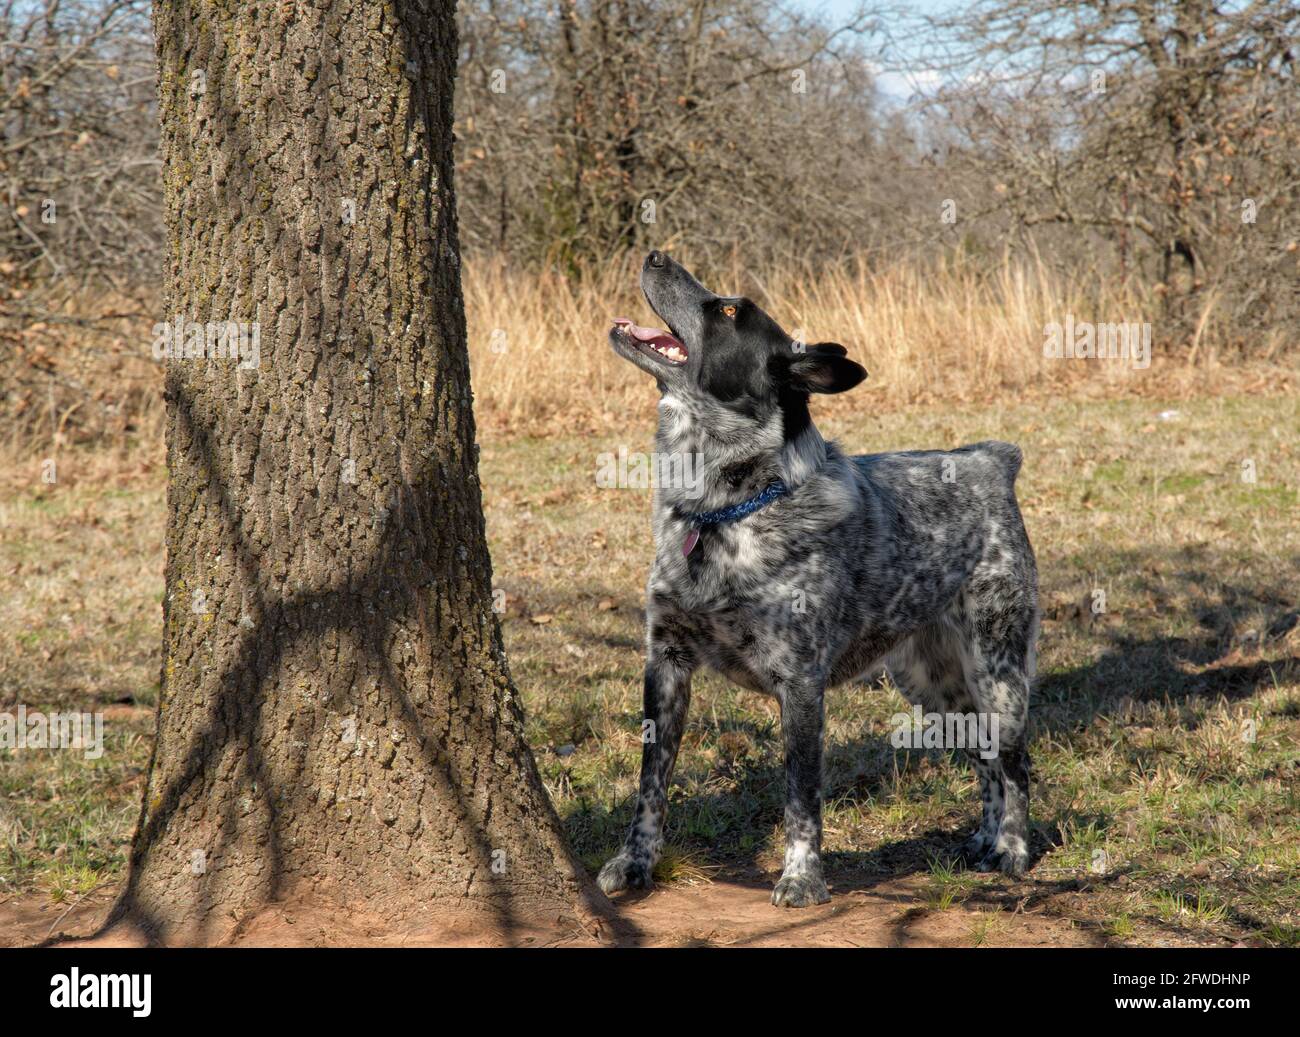 Black and white spotted dog standing under a tree, looking up keenly Stock Photo